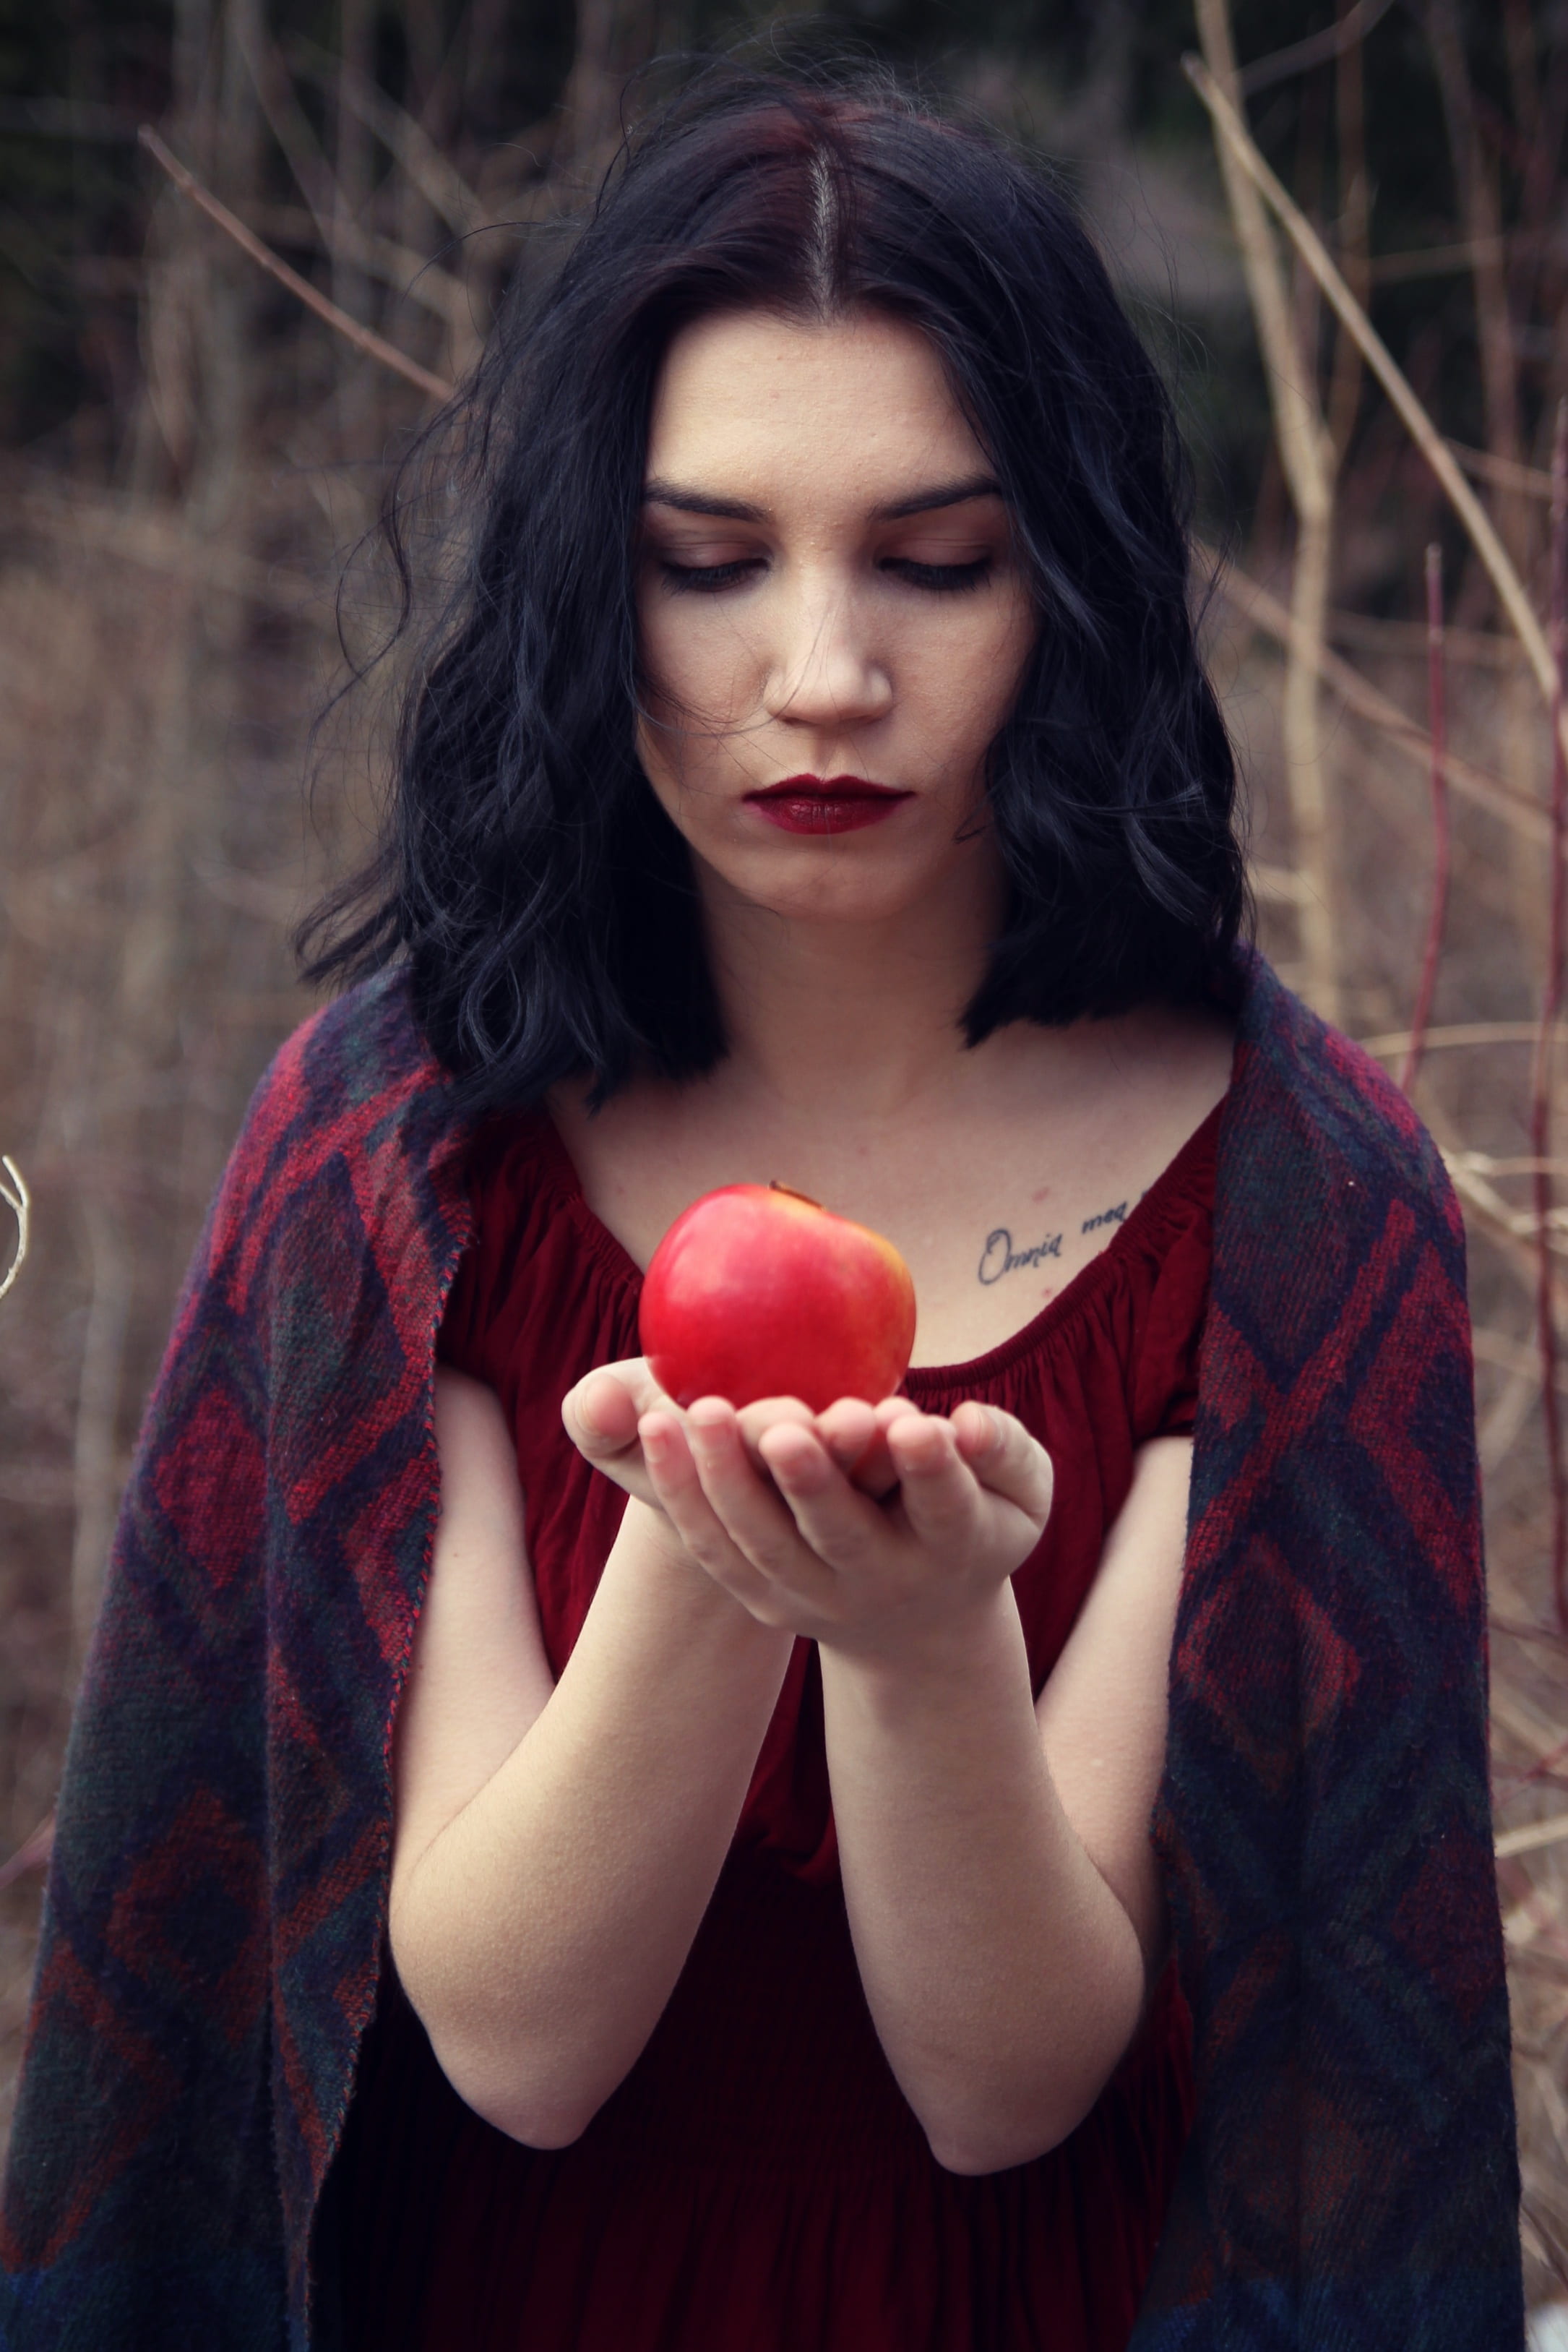 Free Download Hd Wallpaper Woman In Red Top Holding Apple During Daytime Girl Wild Scarf 6249